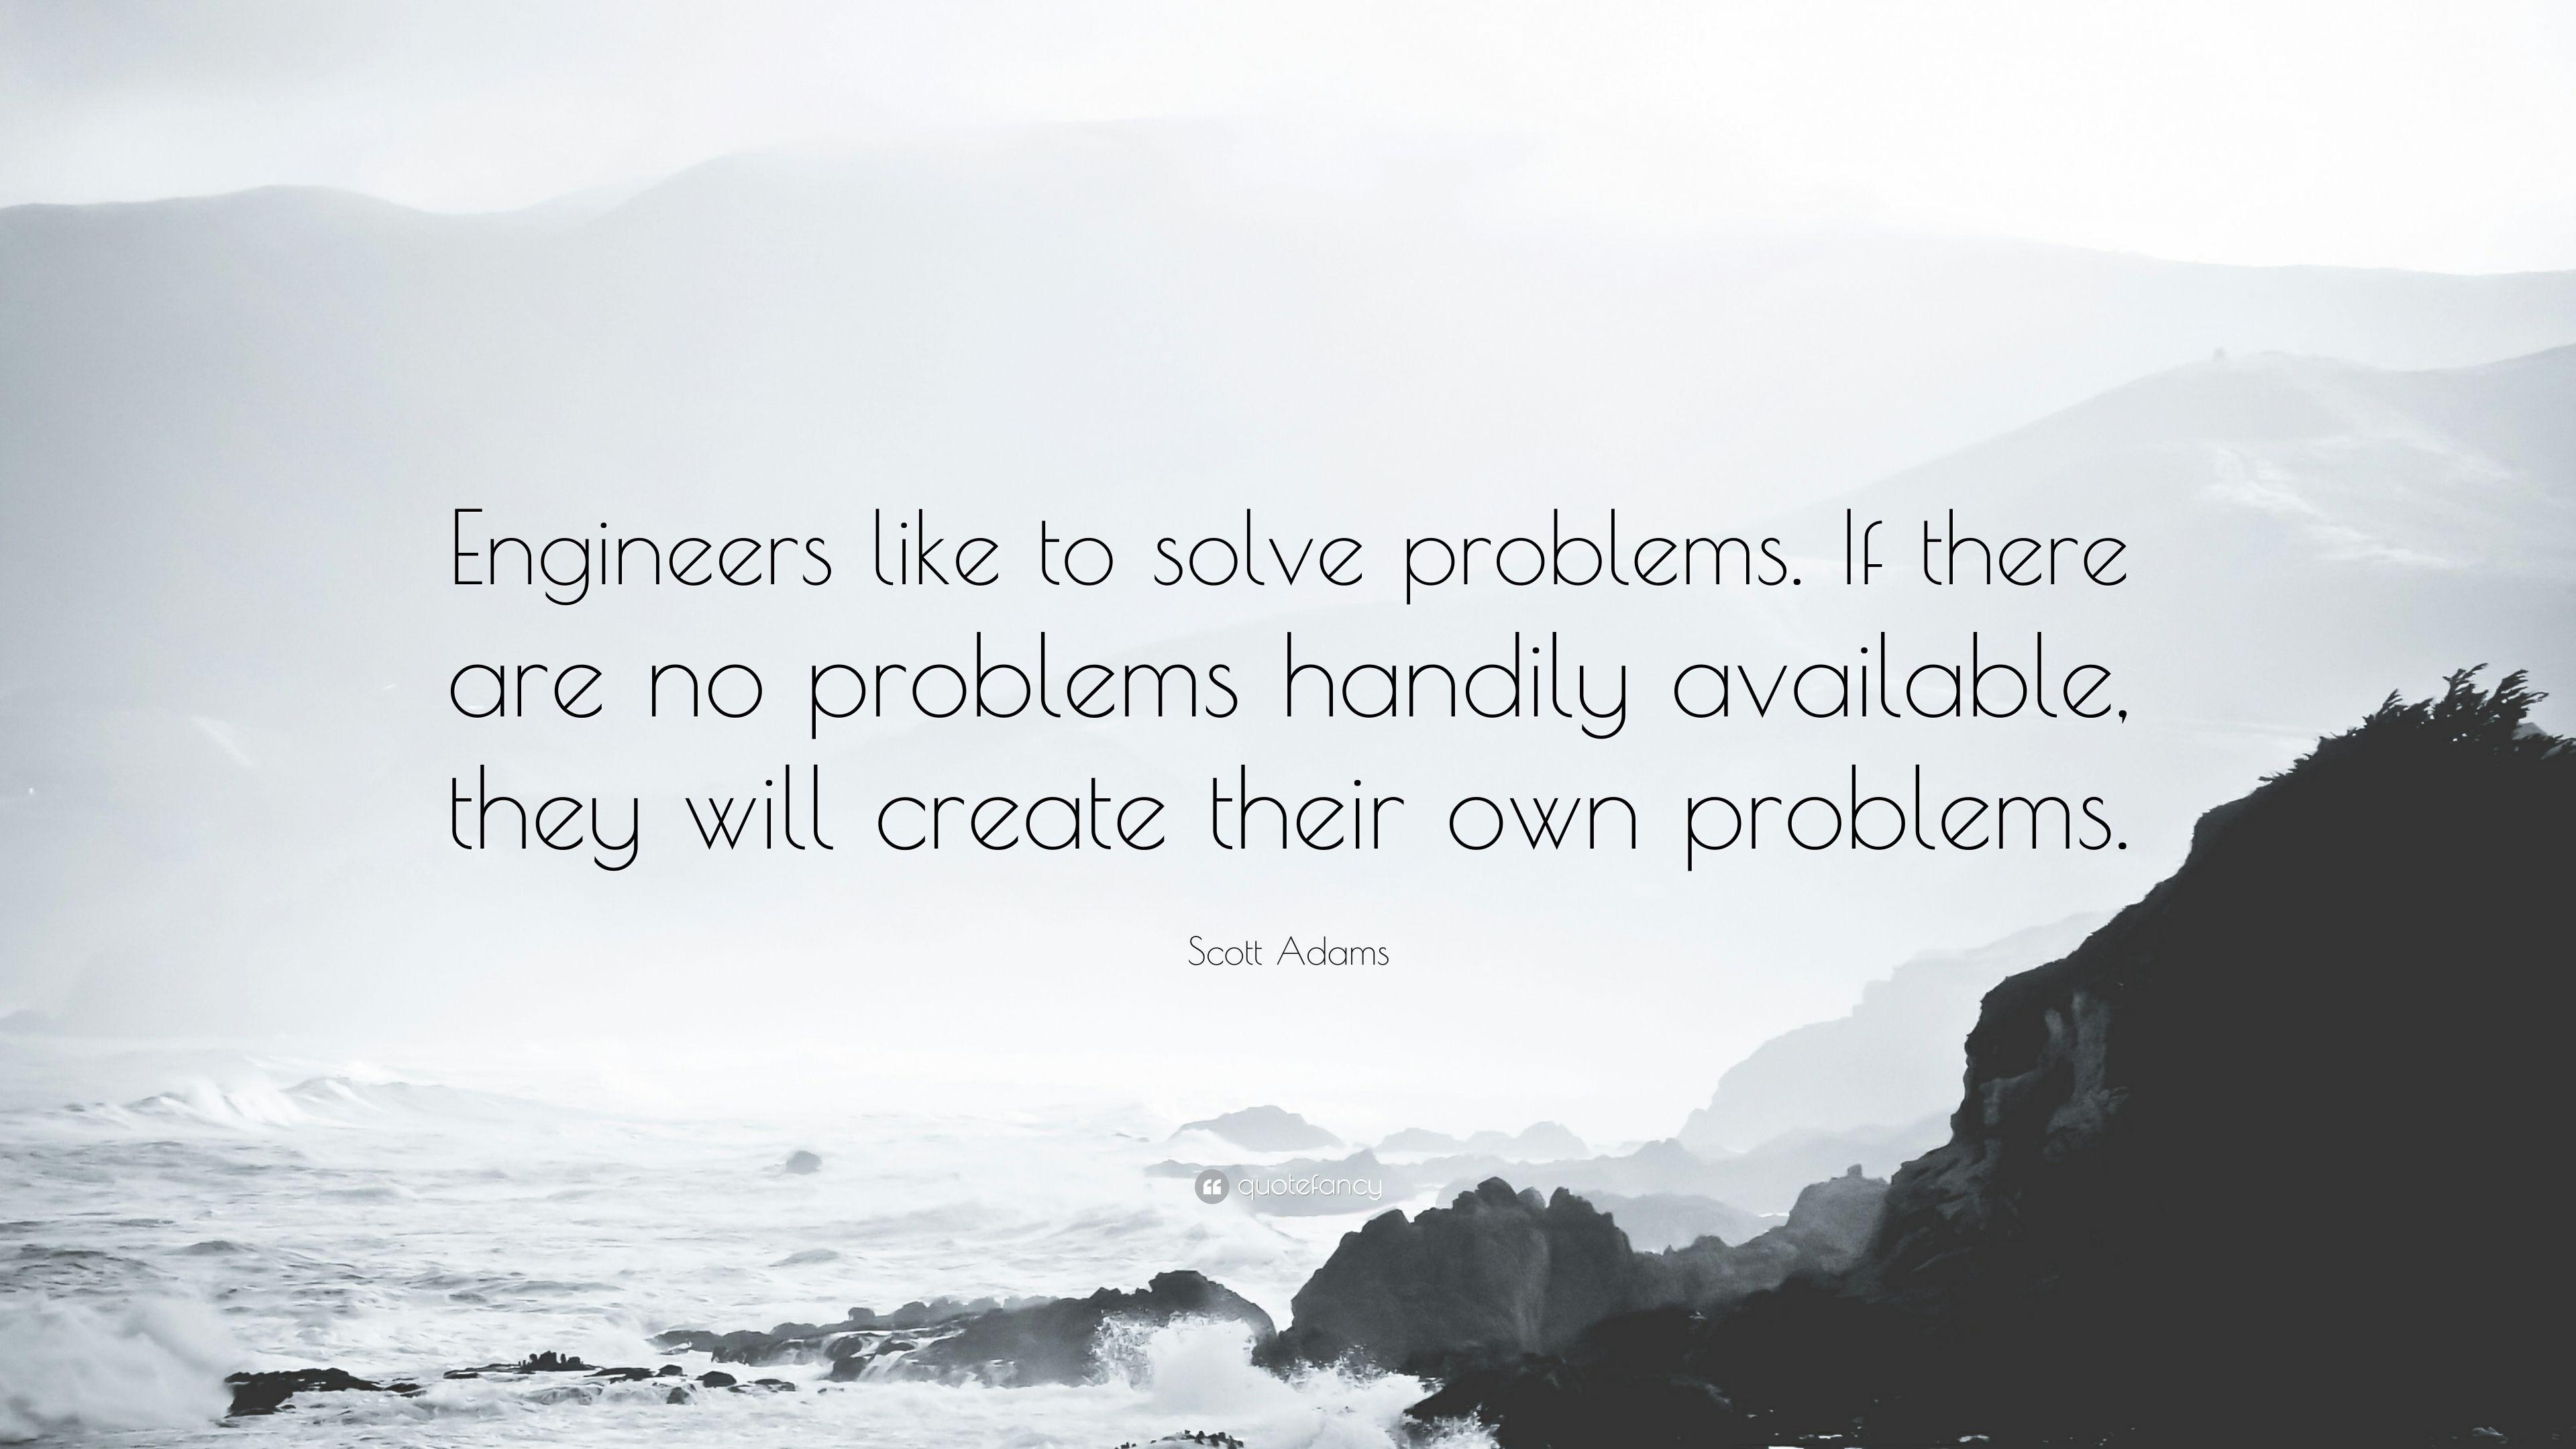 Scott Adams Quote: “Engineers like to solve problems. If there are